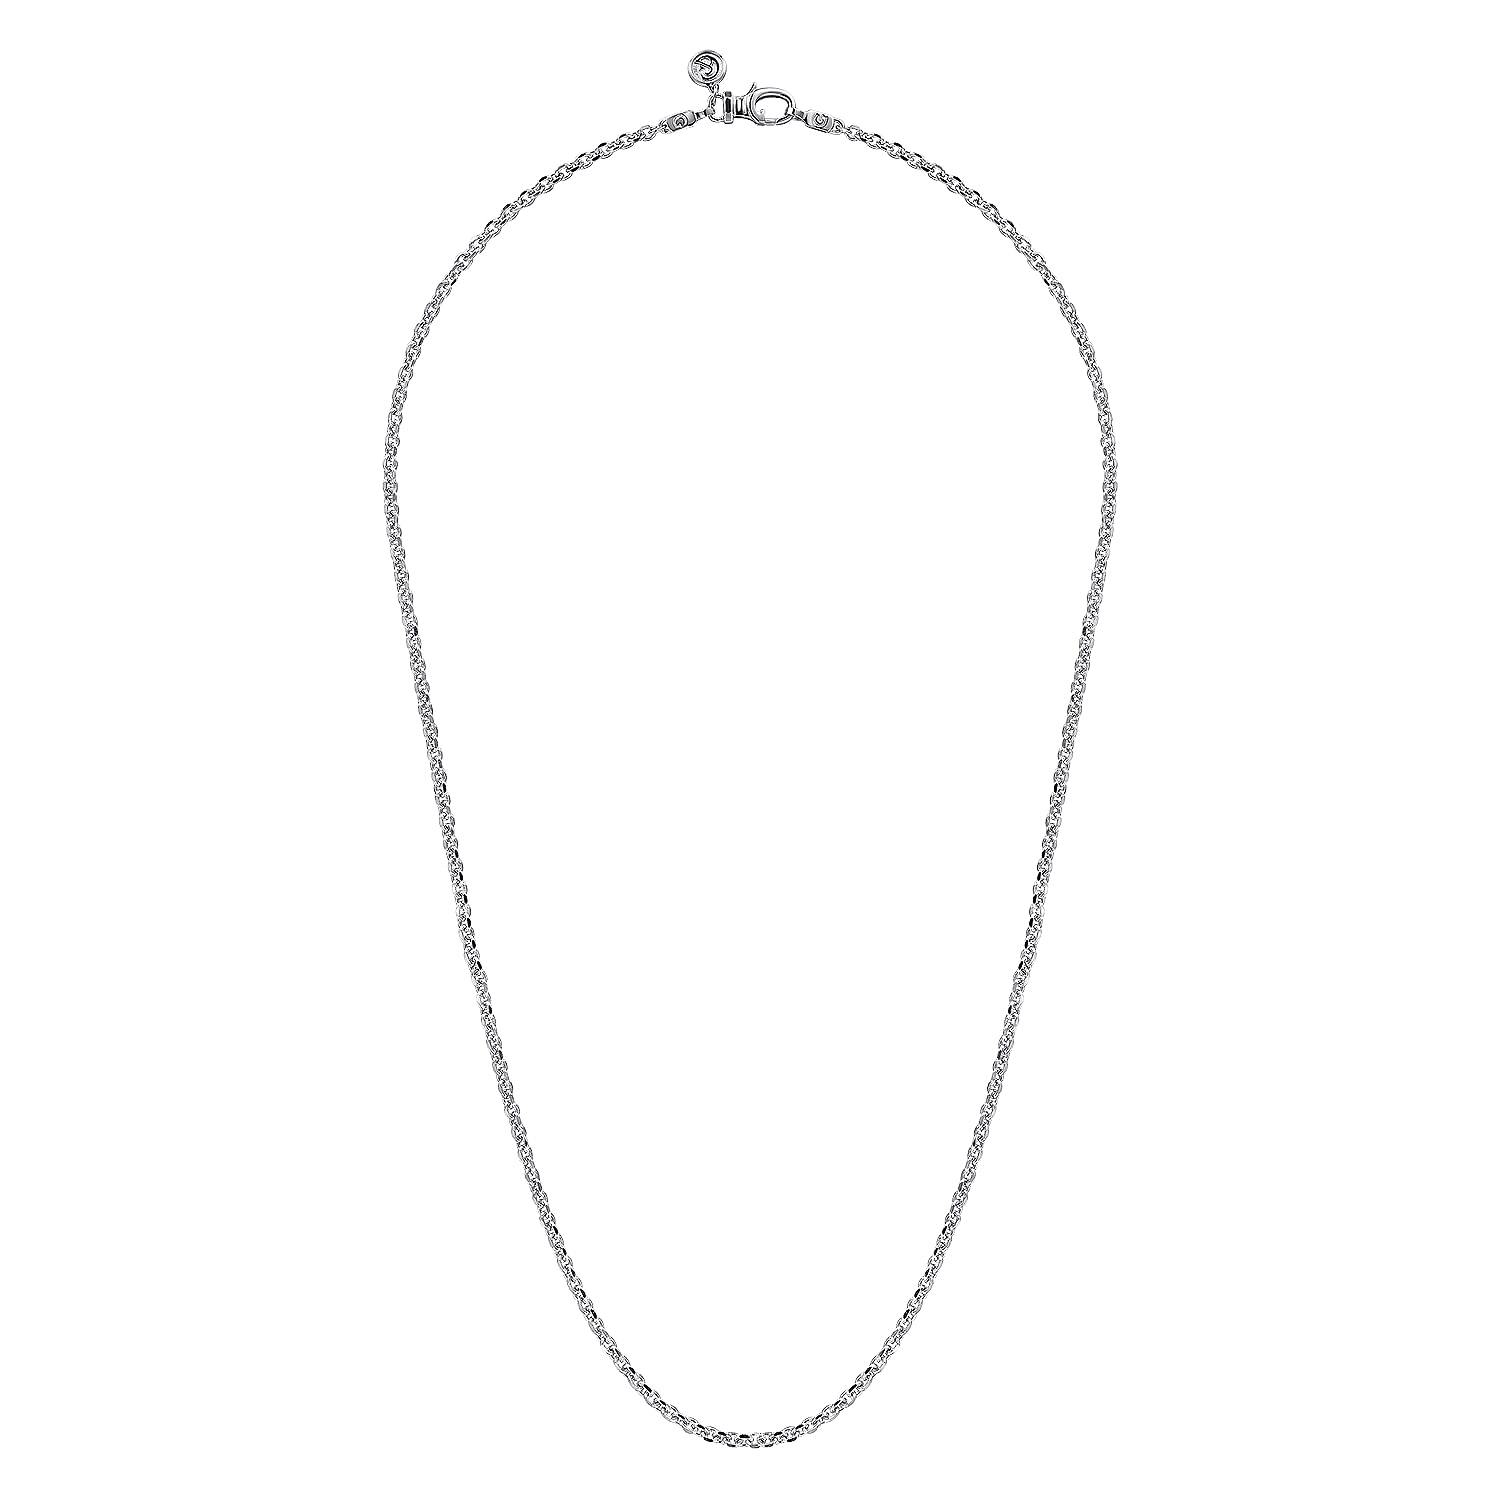 22-Inch-925-Sterling-Silver-Men's-Link-Chain-Necklace2